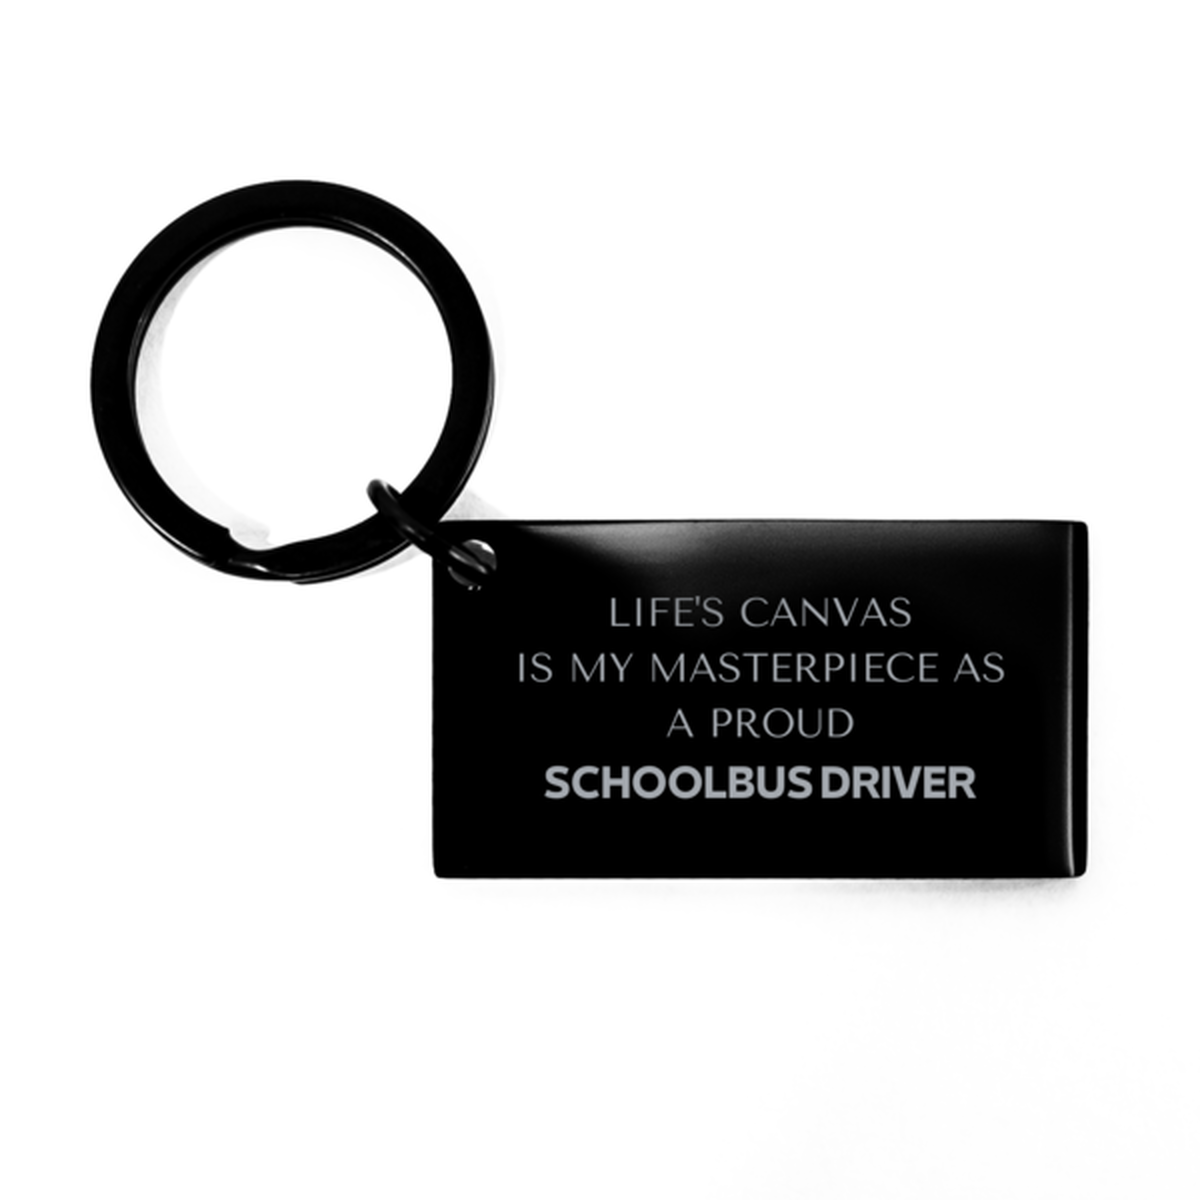 Proud Schoolbus Driver Gifts, Life's canvas is my masterpiece, Epic Birthday Christmas Unique Keychain For Schoolbus Driver, Coworkers, Men, Women, Friends